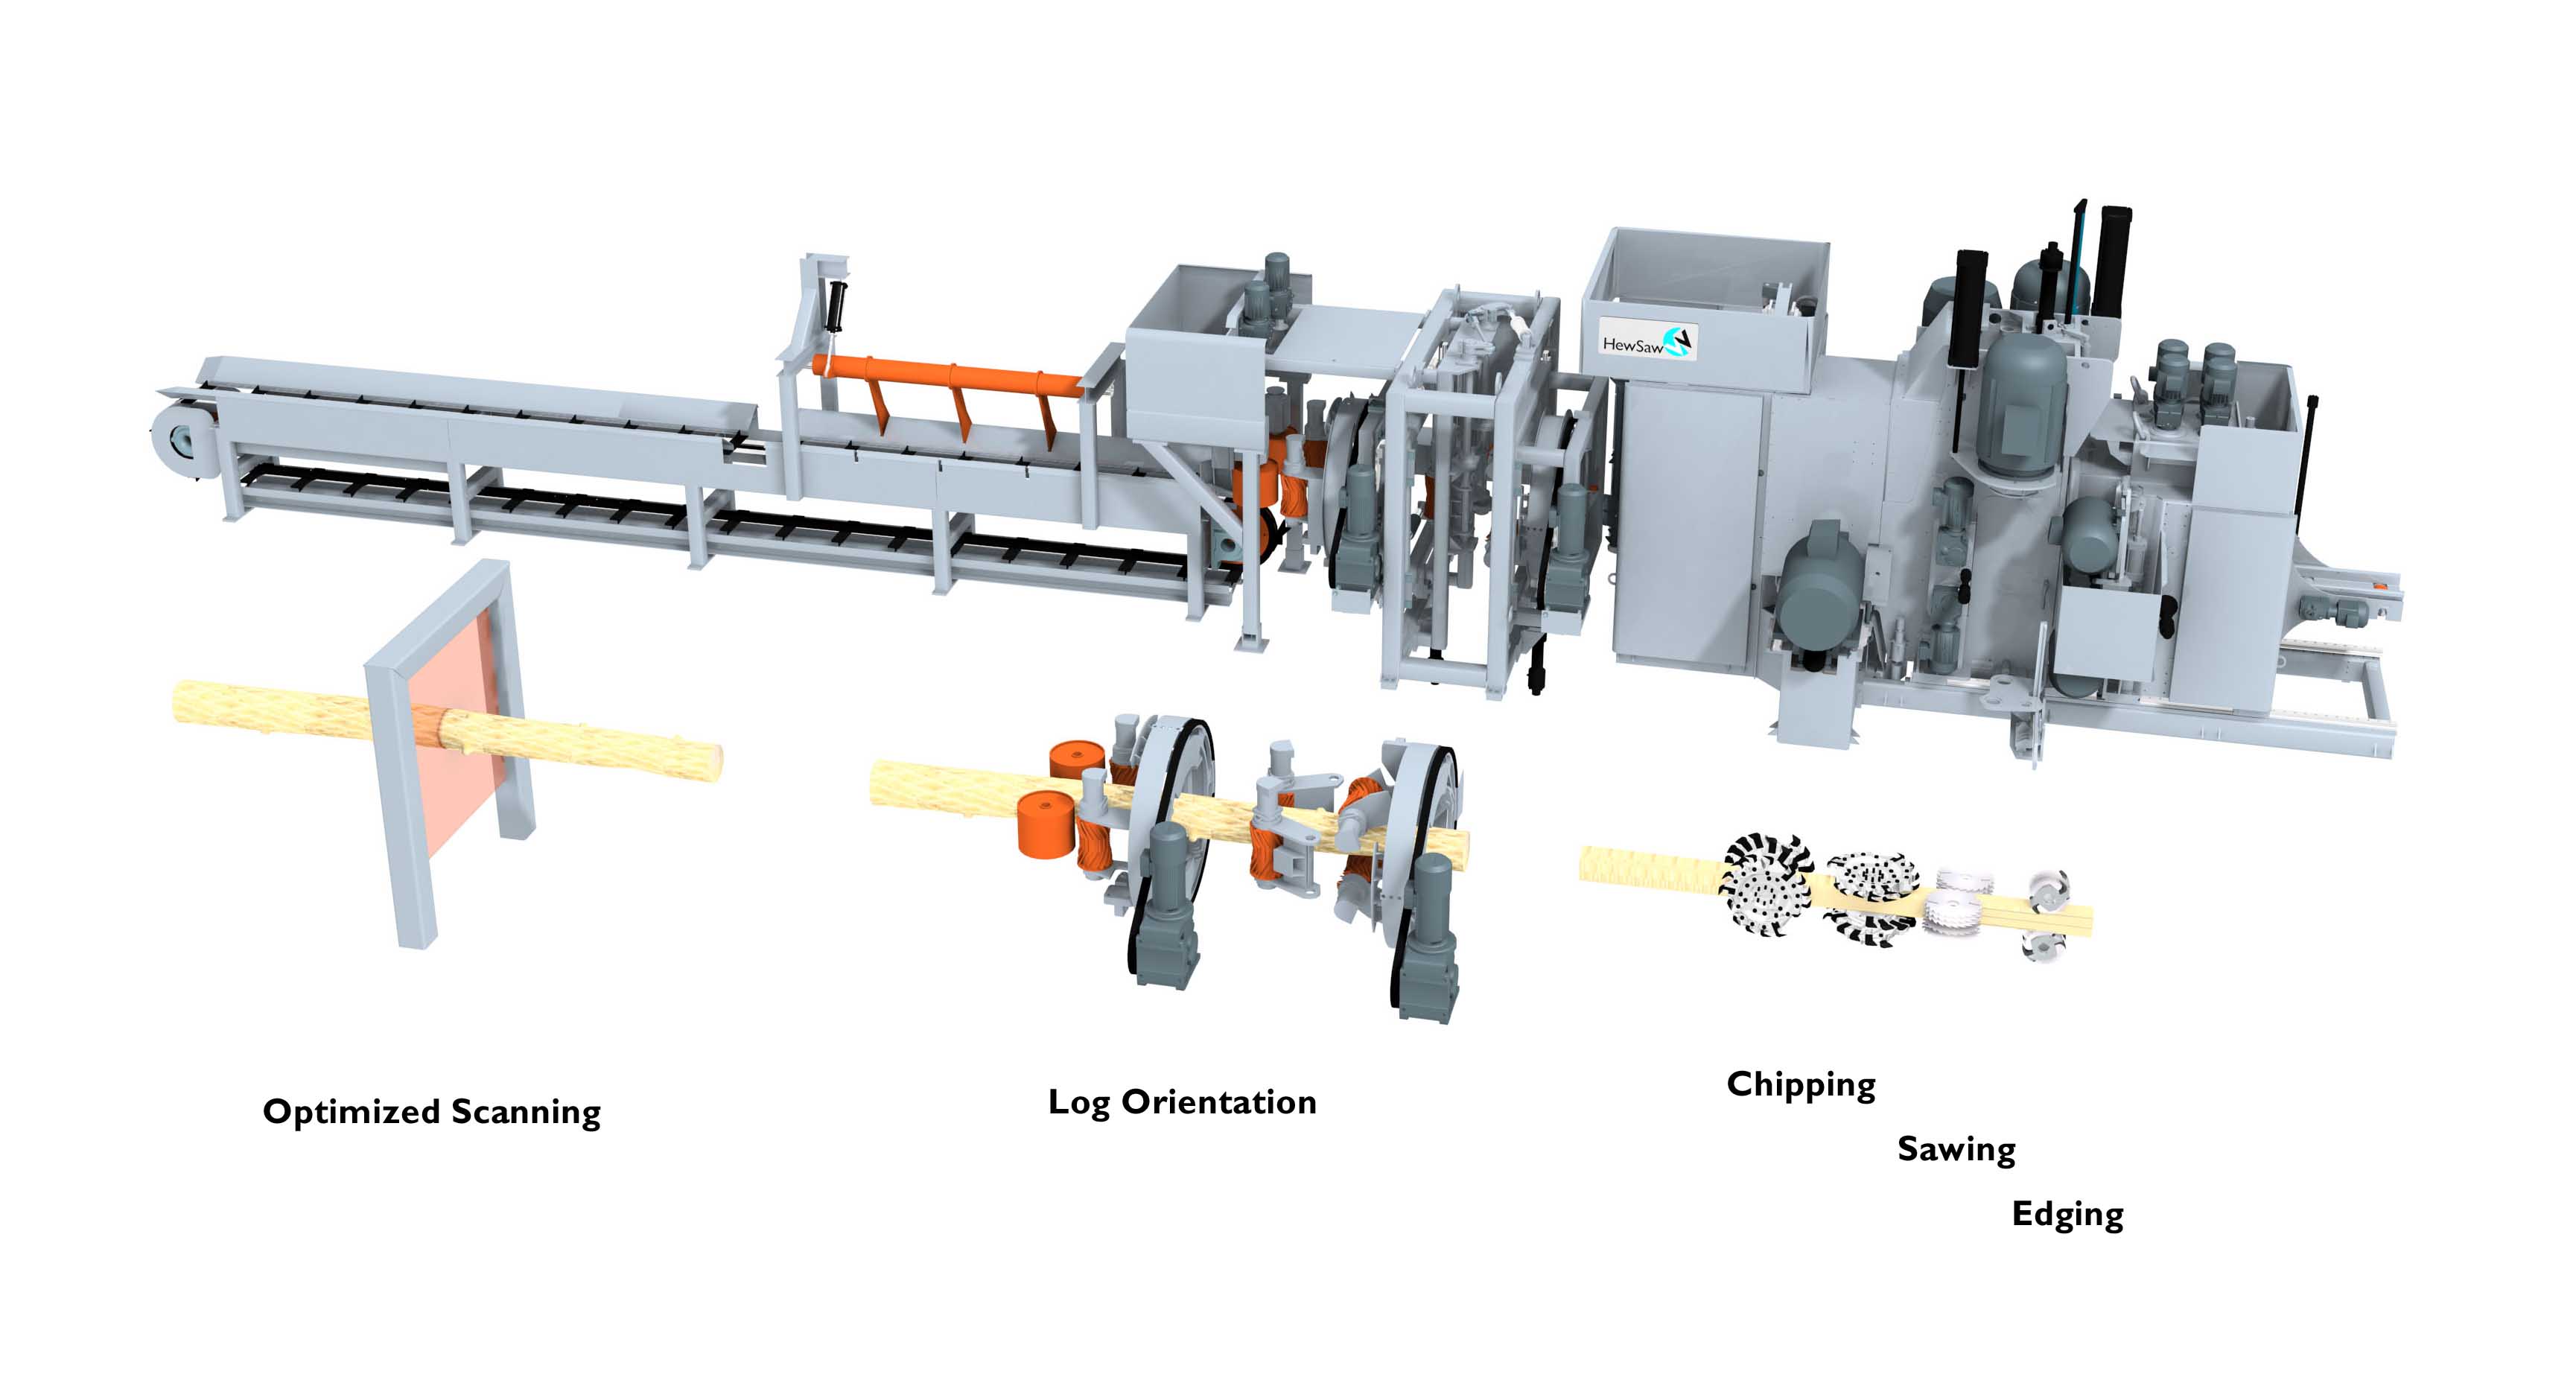 Overview of the HewSaw R200 1.1 saw line